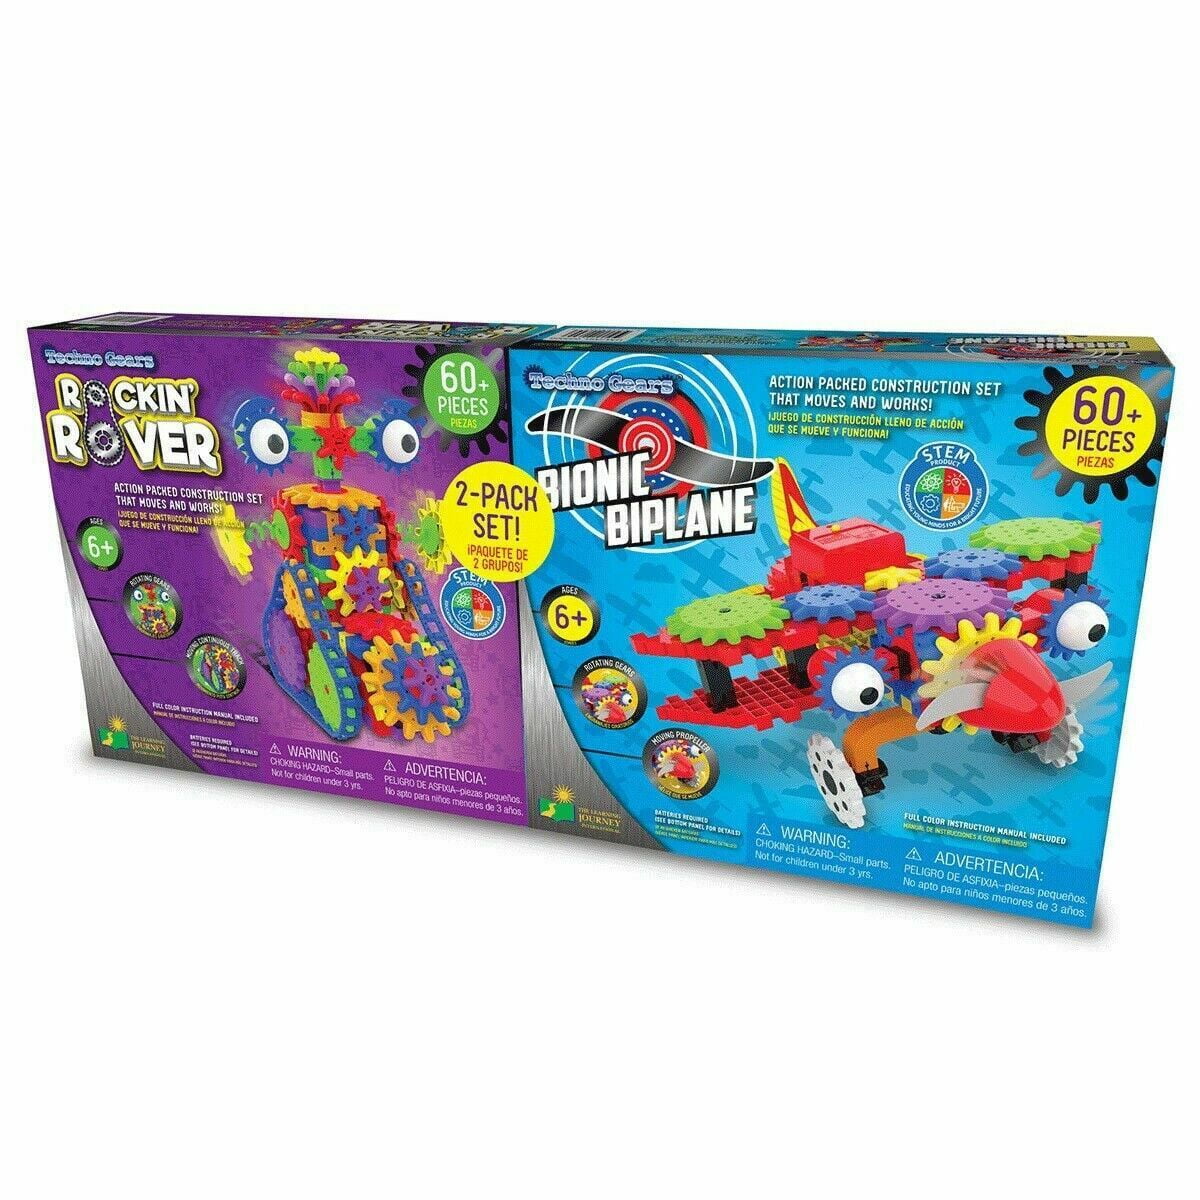 Techno Gears 2 Game Set Marble Mania Zany Trax 4.0 and Dizzy Droid Stem for sale online 